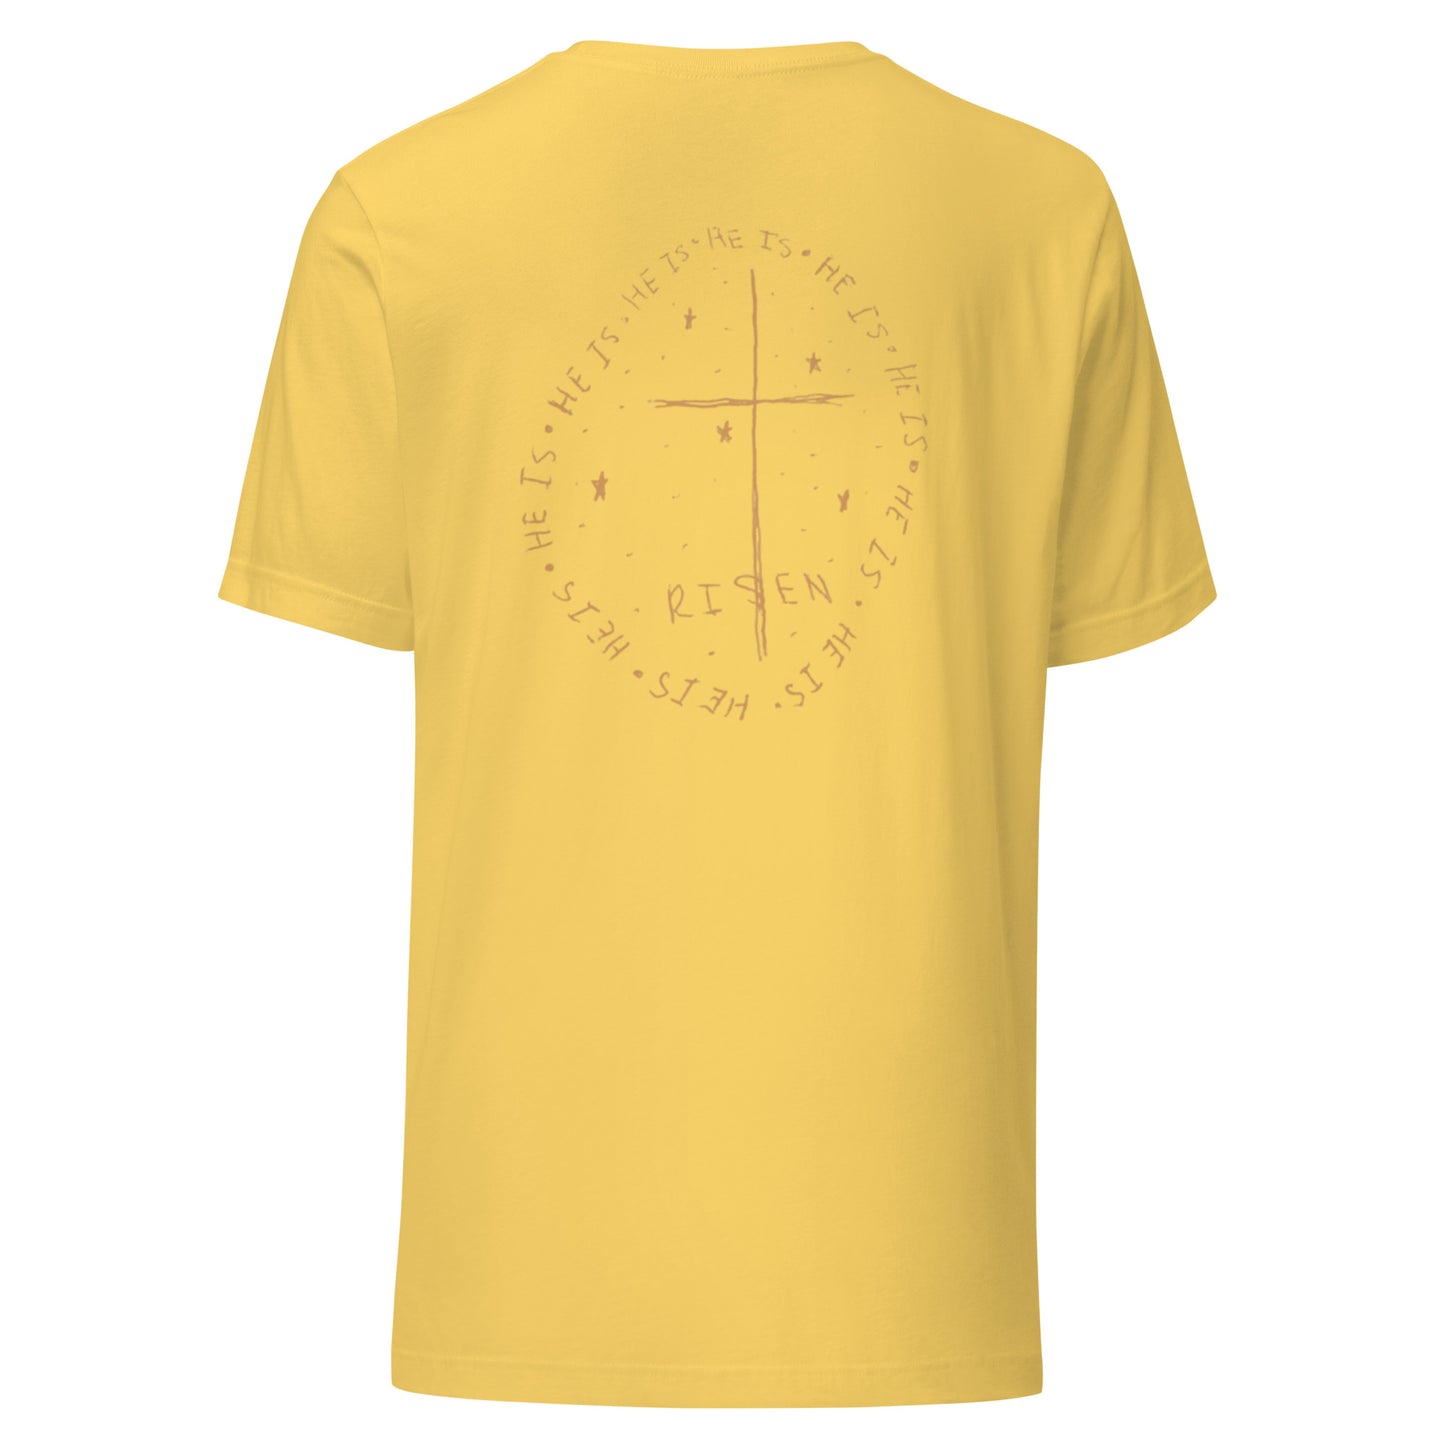 Unisex He Is Risen Easter Contest Tee